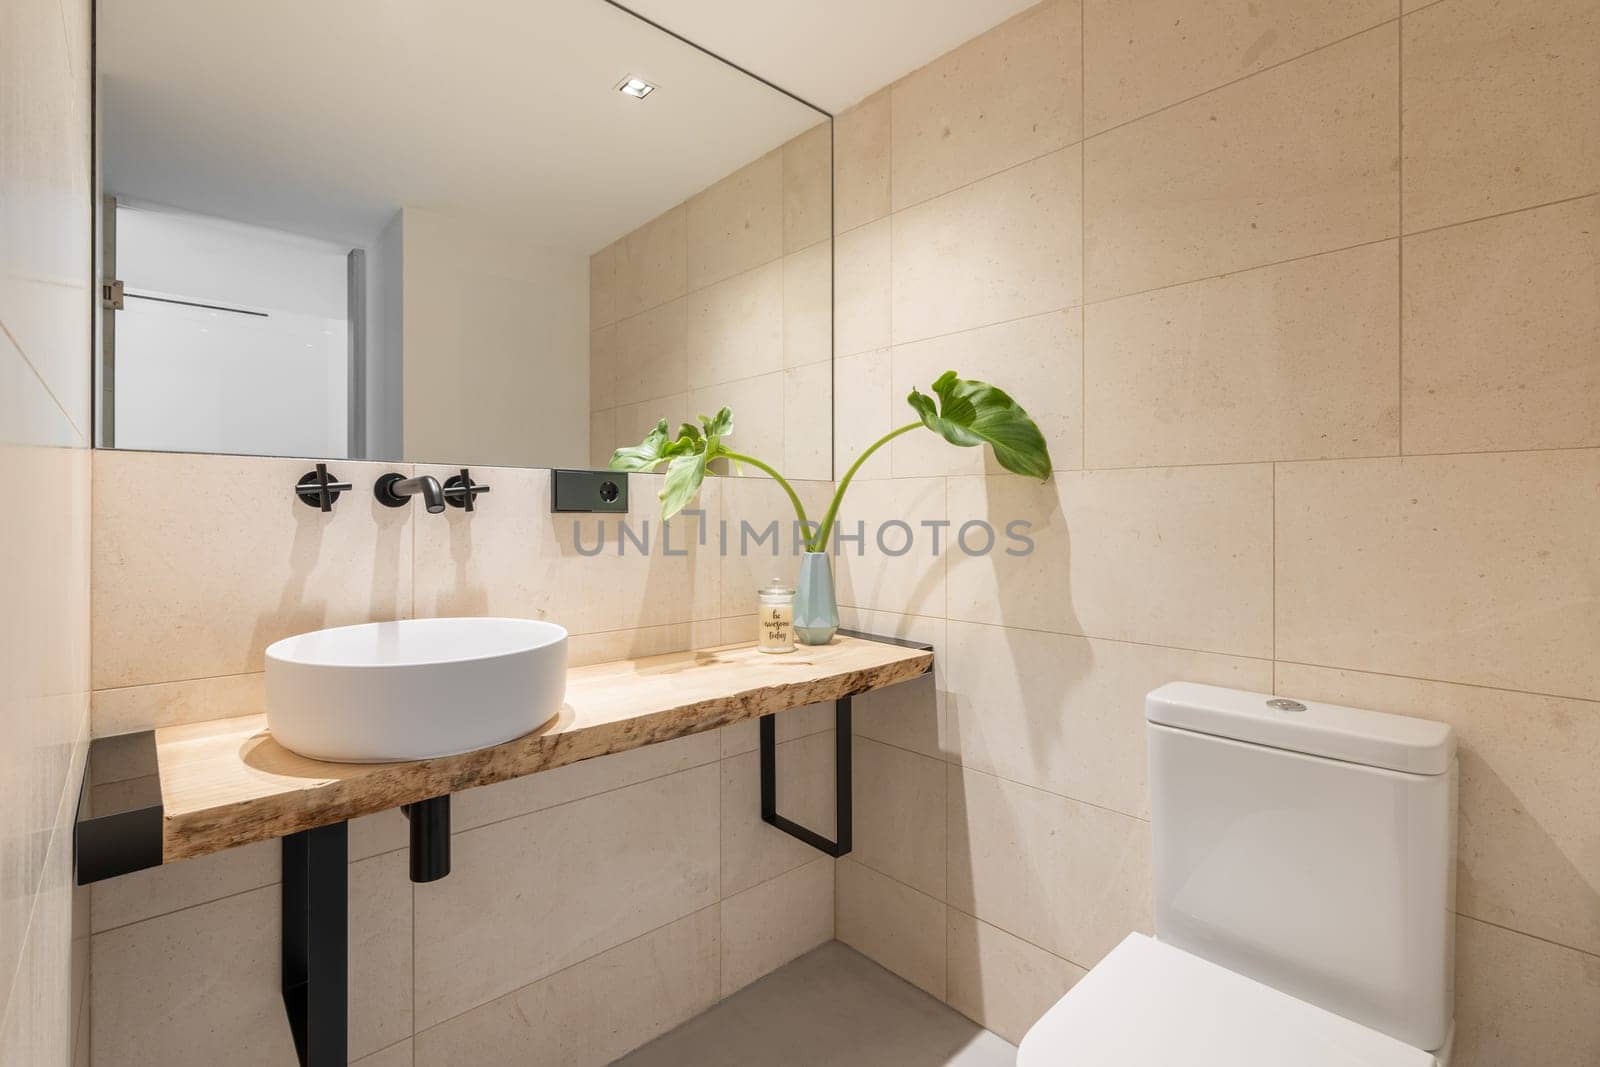 Stylish bright bathroom with beige tiles on the walls and a large mirror with a sink in a wooden countertop and a toilet. The concept of an unusual but concise shower design.